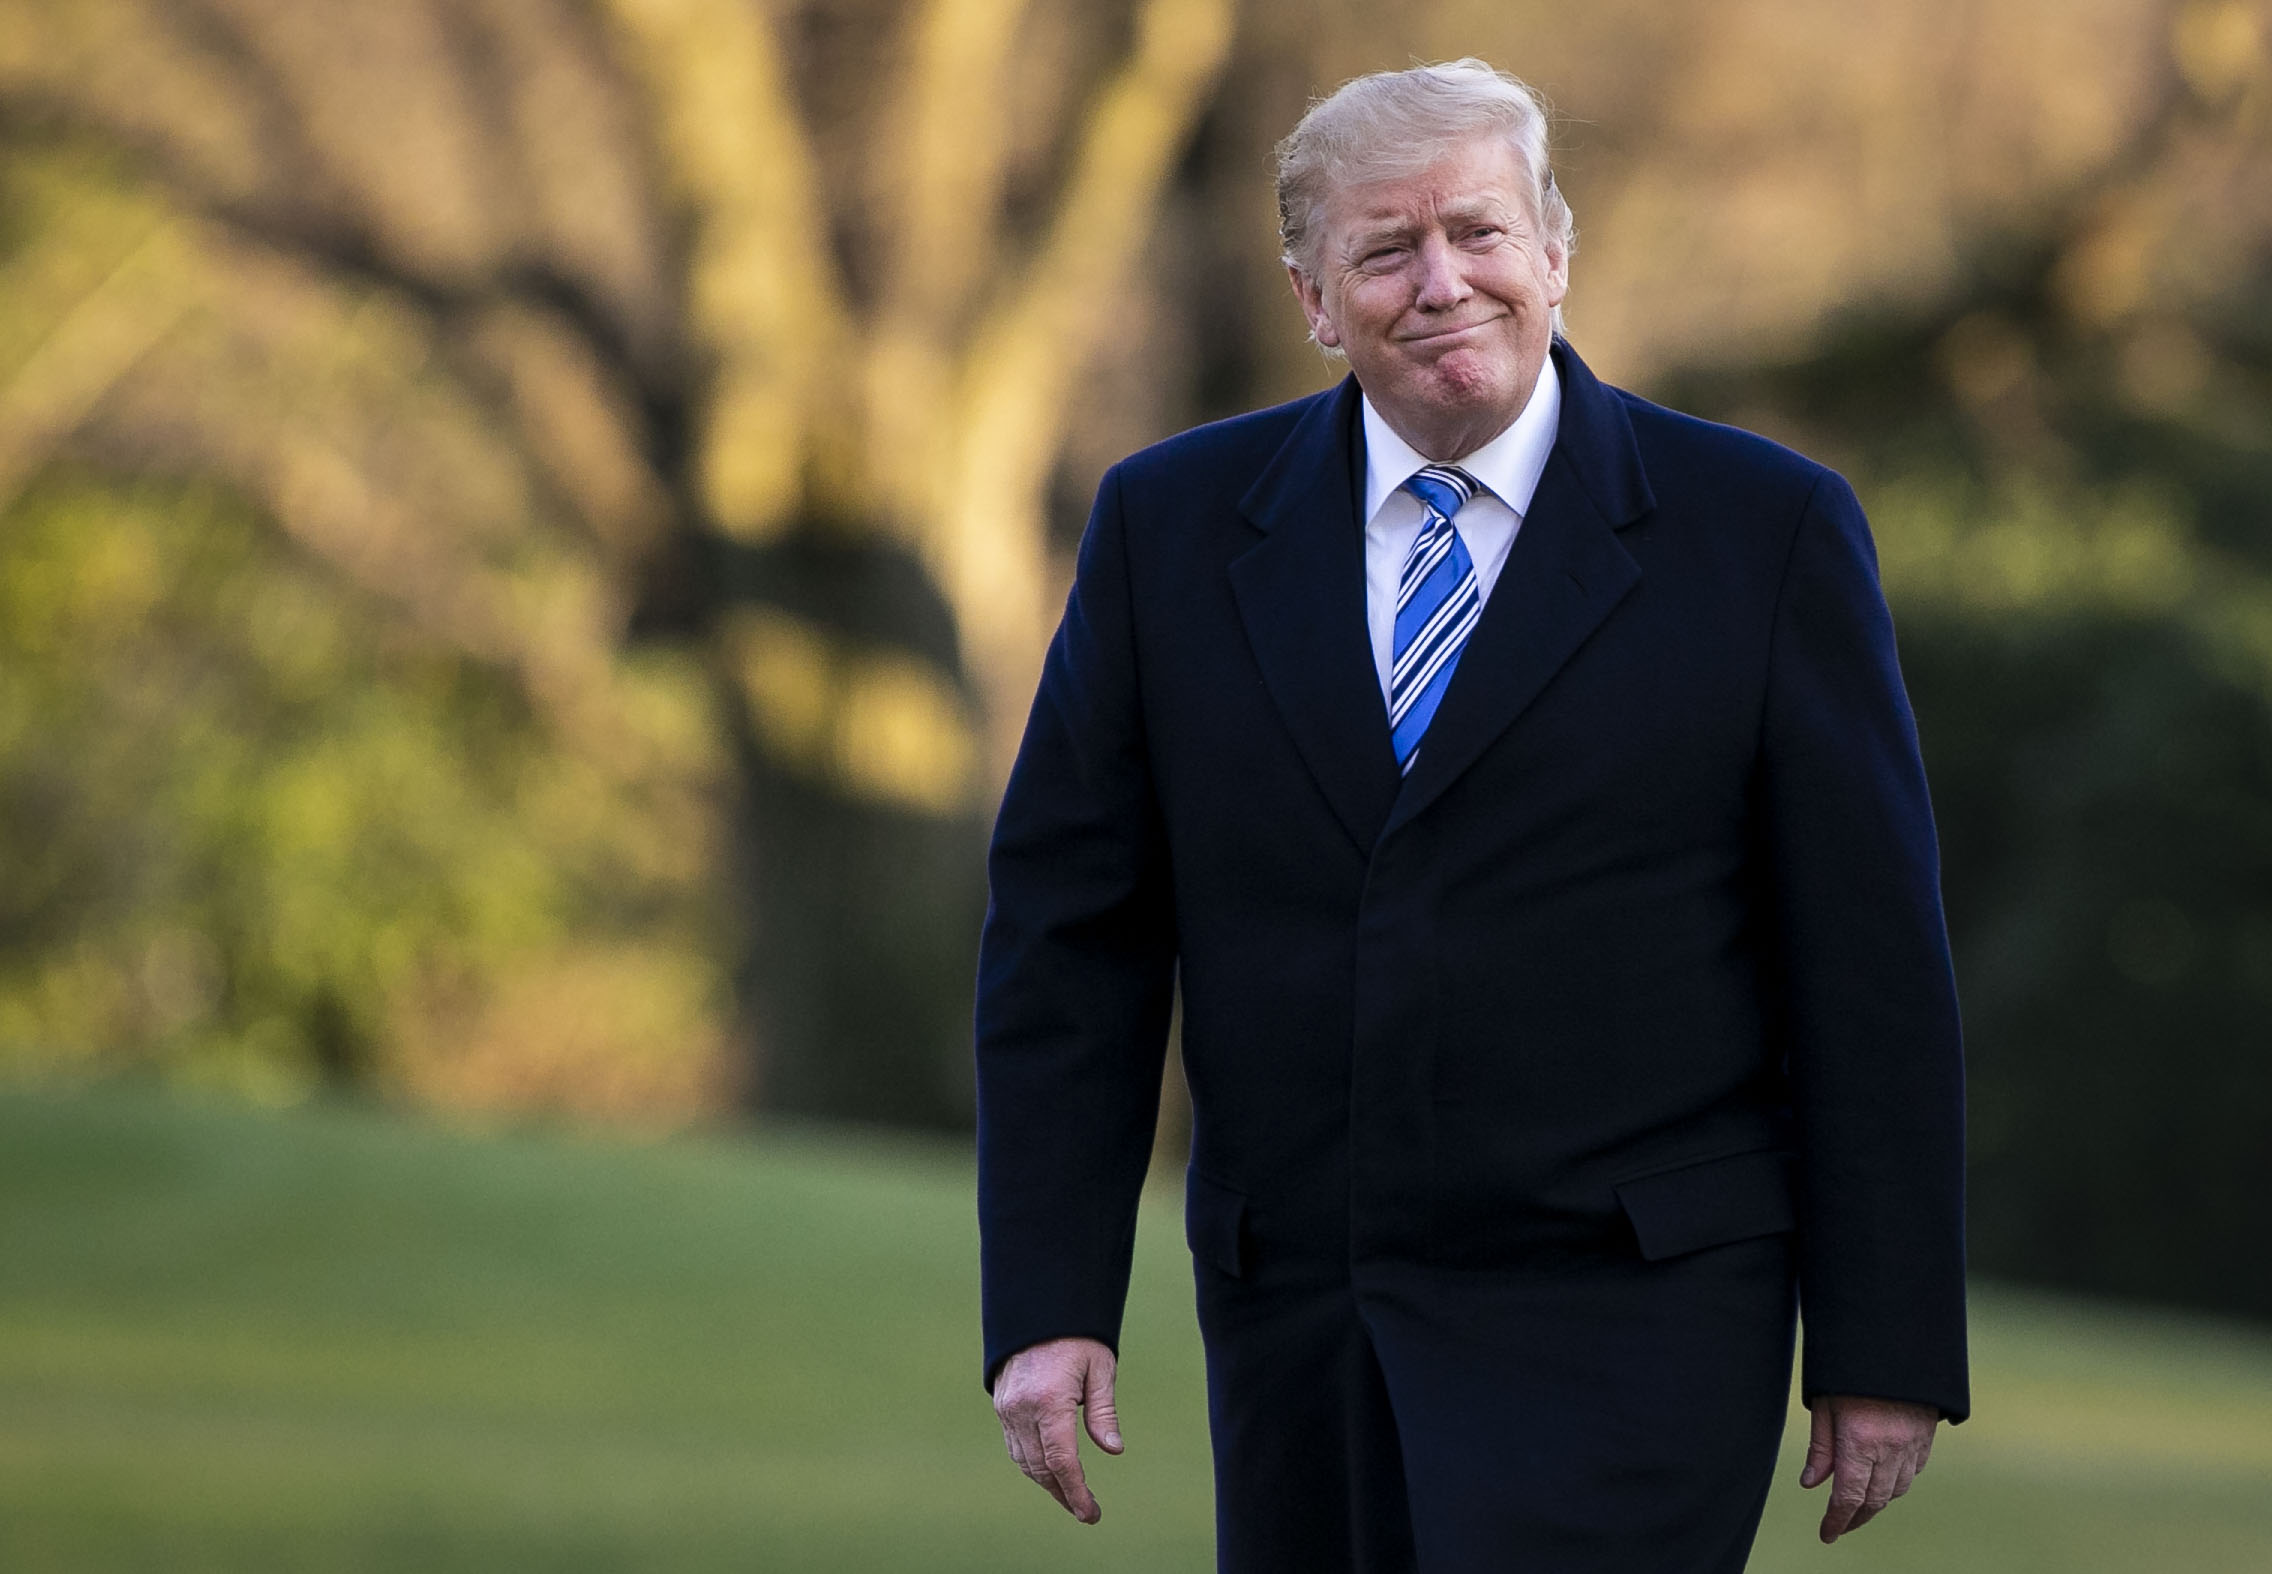 President Donald Trump walks on the South Lawn of the White House, on March 10, 2019 in Washington, DC. (Al Drago—Getty Images)